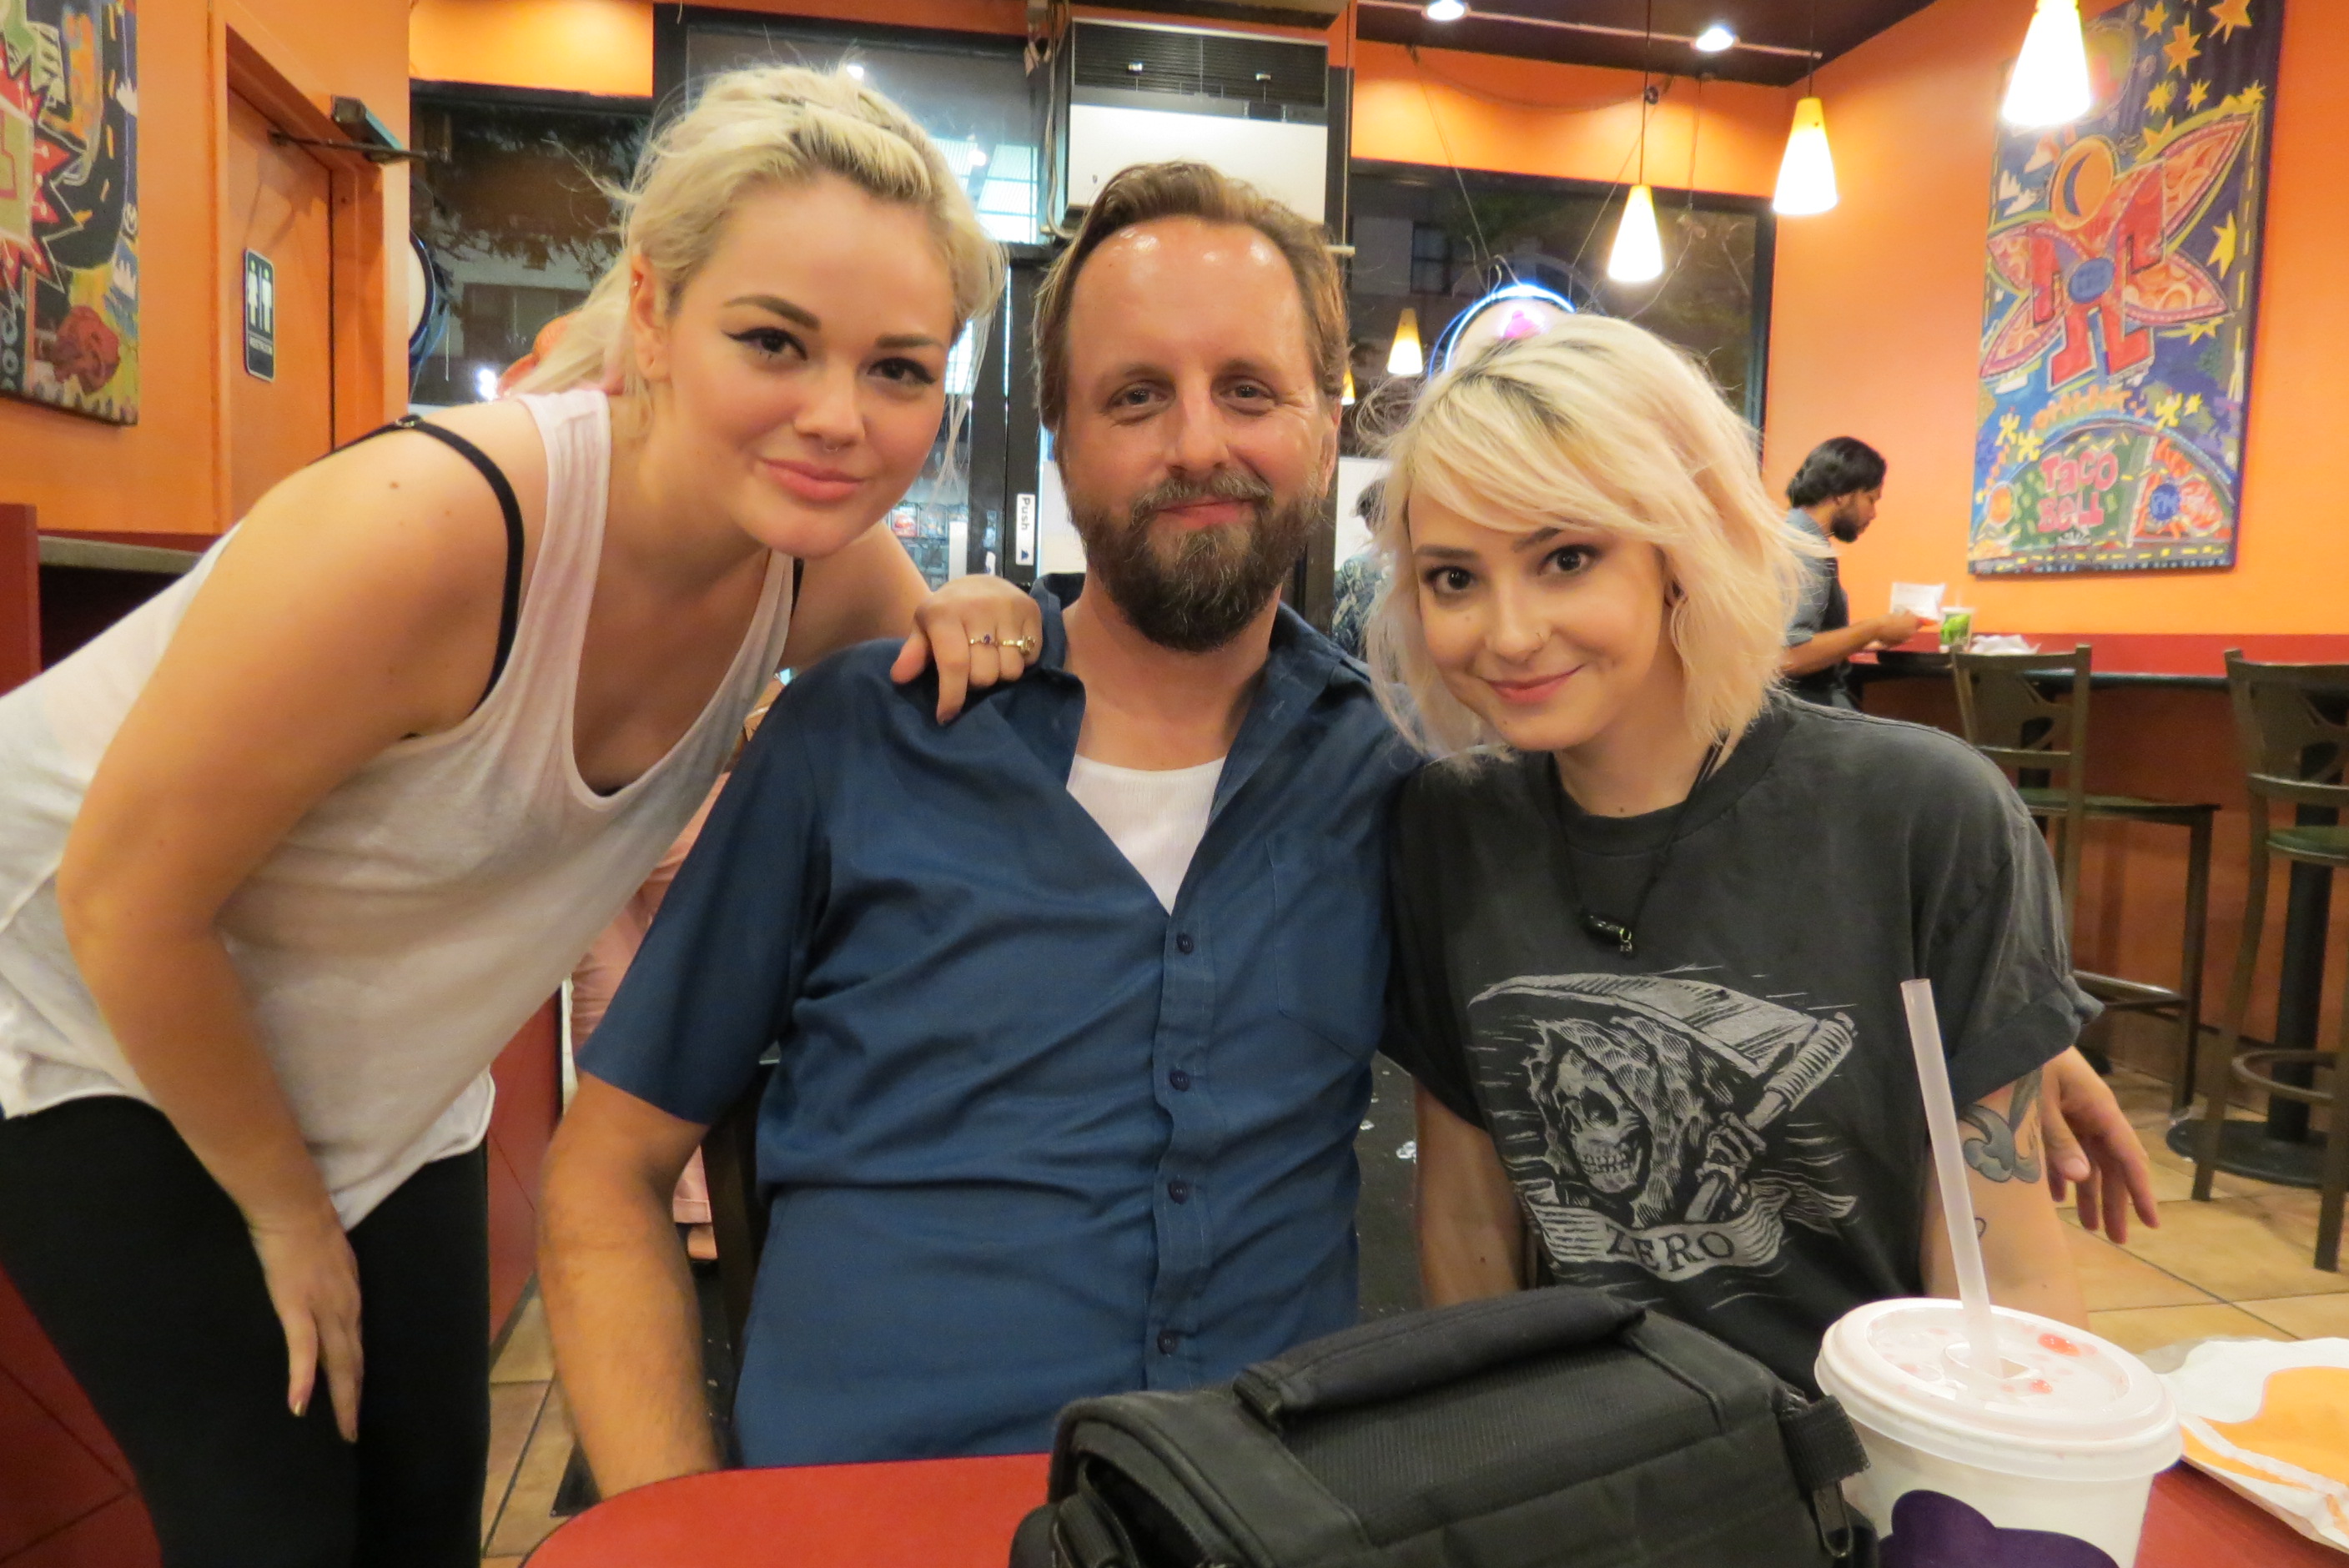 Normal Bob with blonde girls at Taco Bell